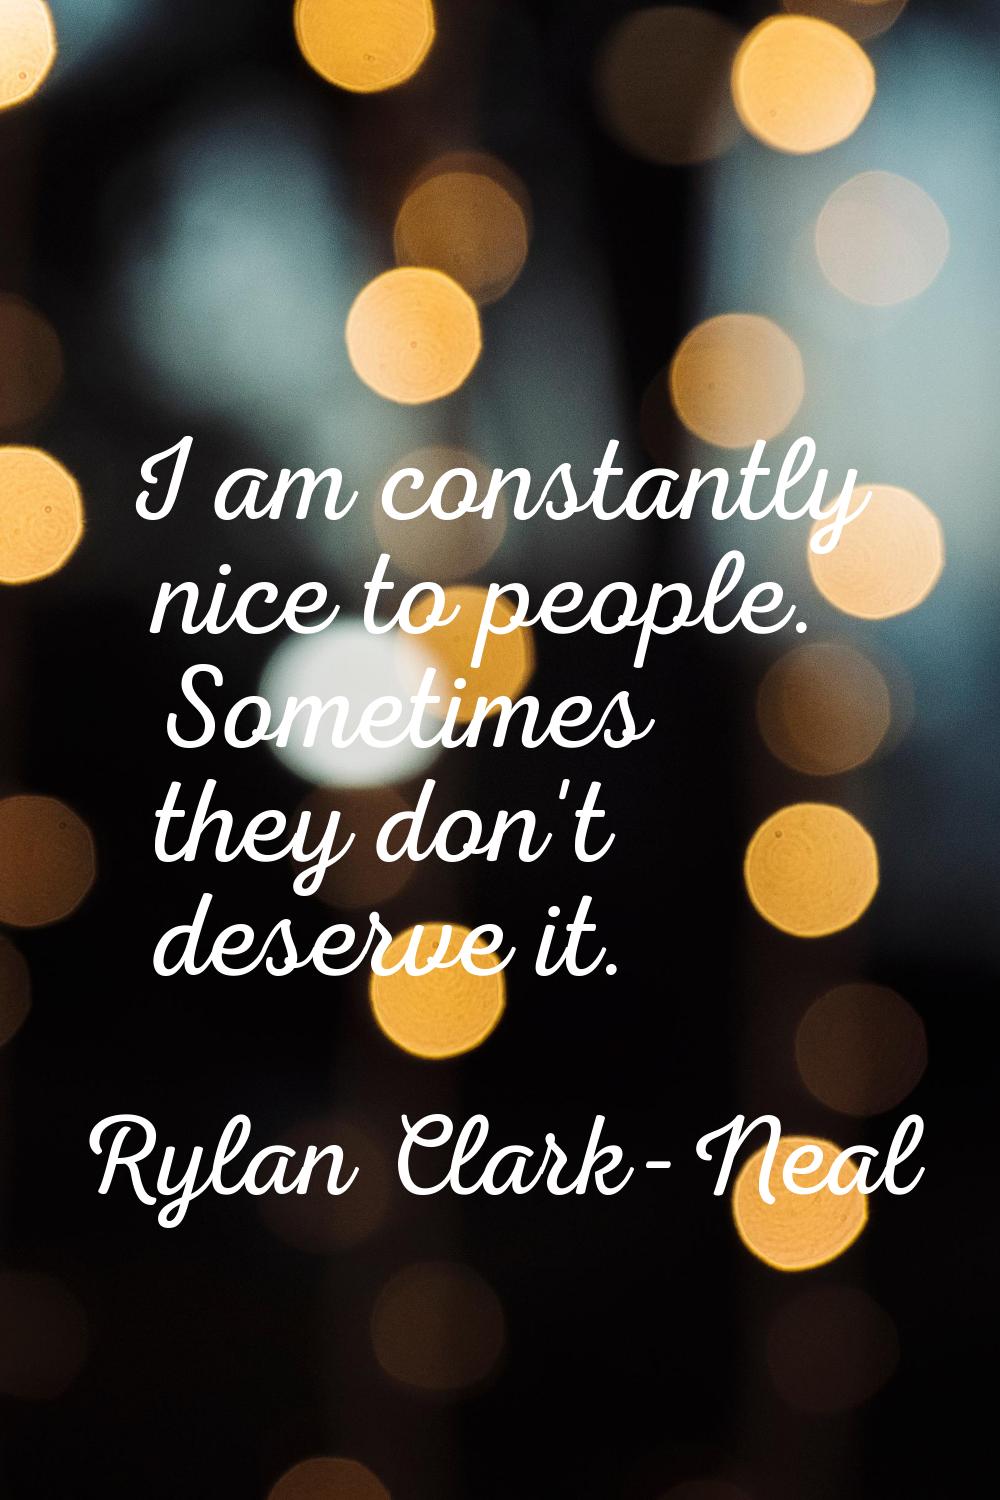 I am constantly nice to people. Sometimes they don't deserve it.